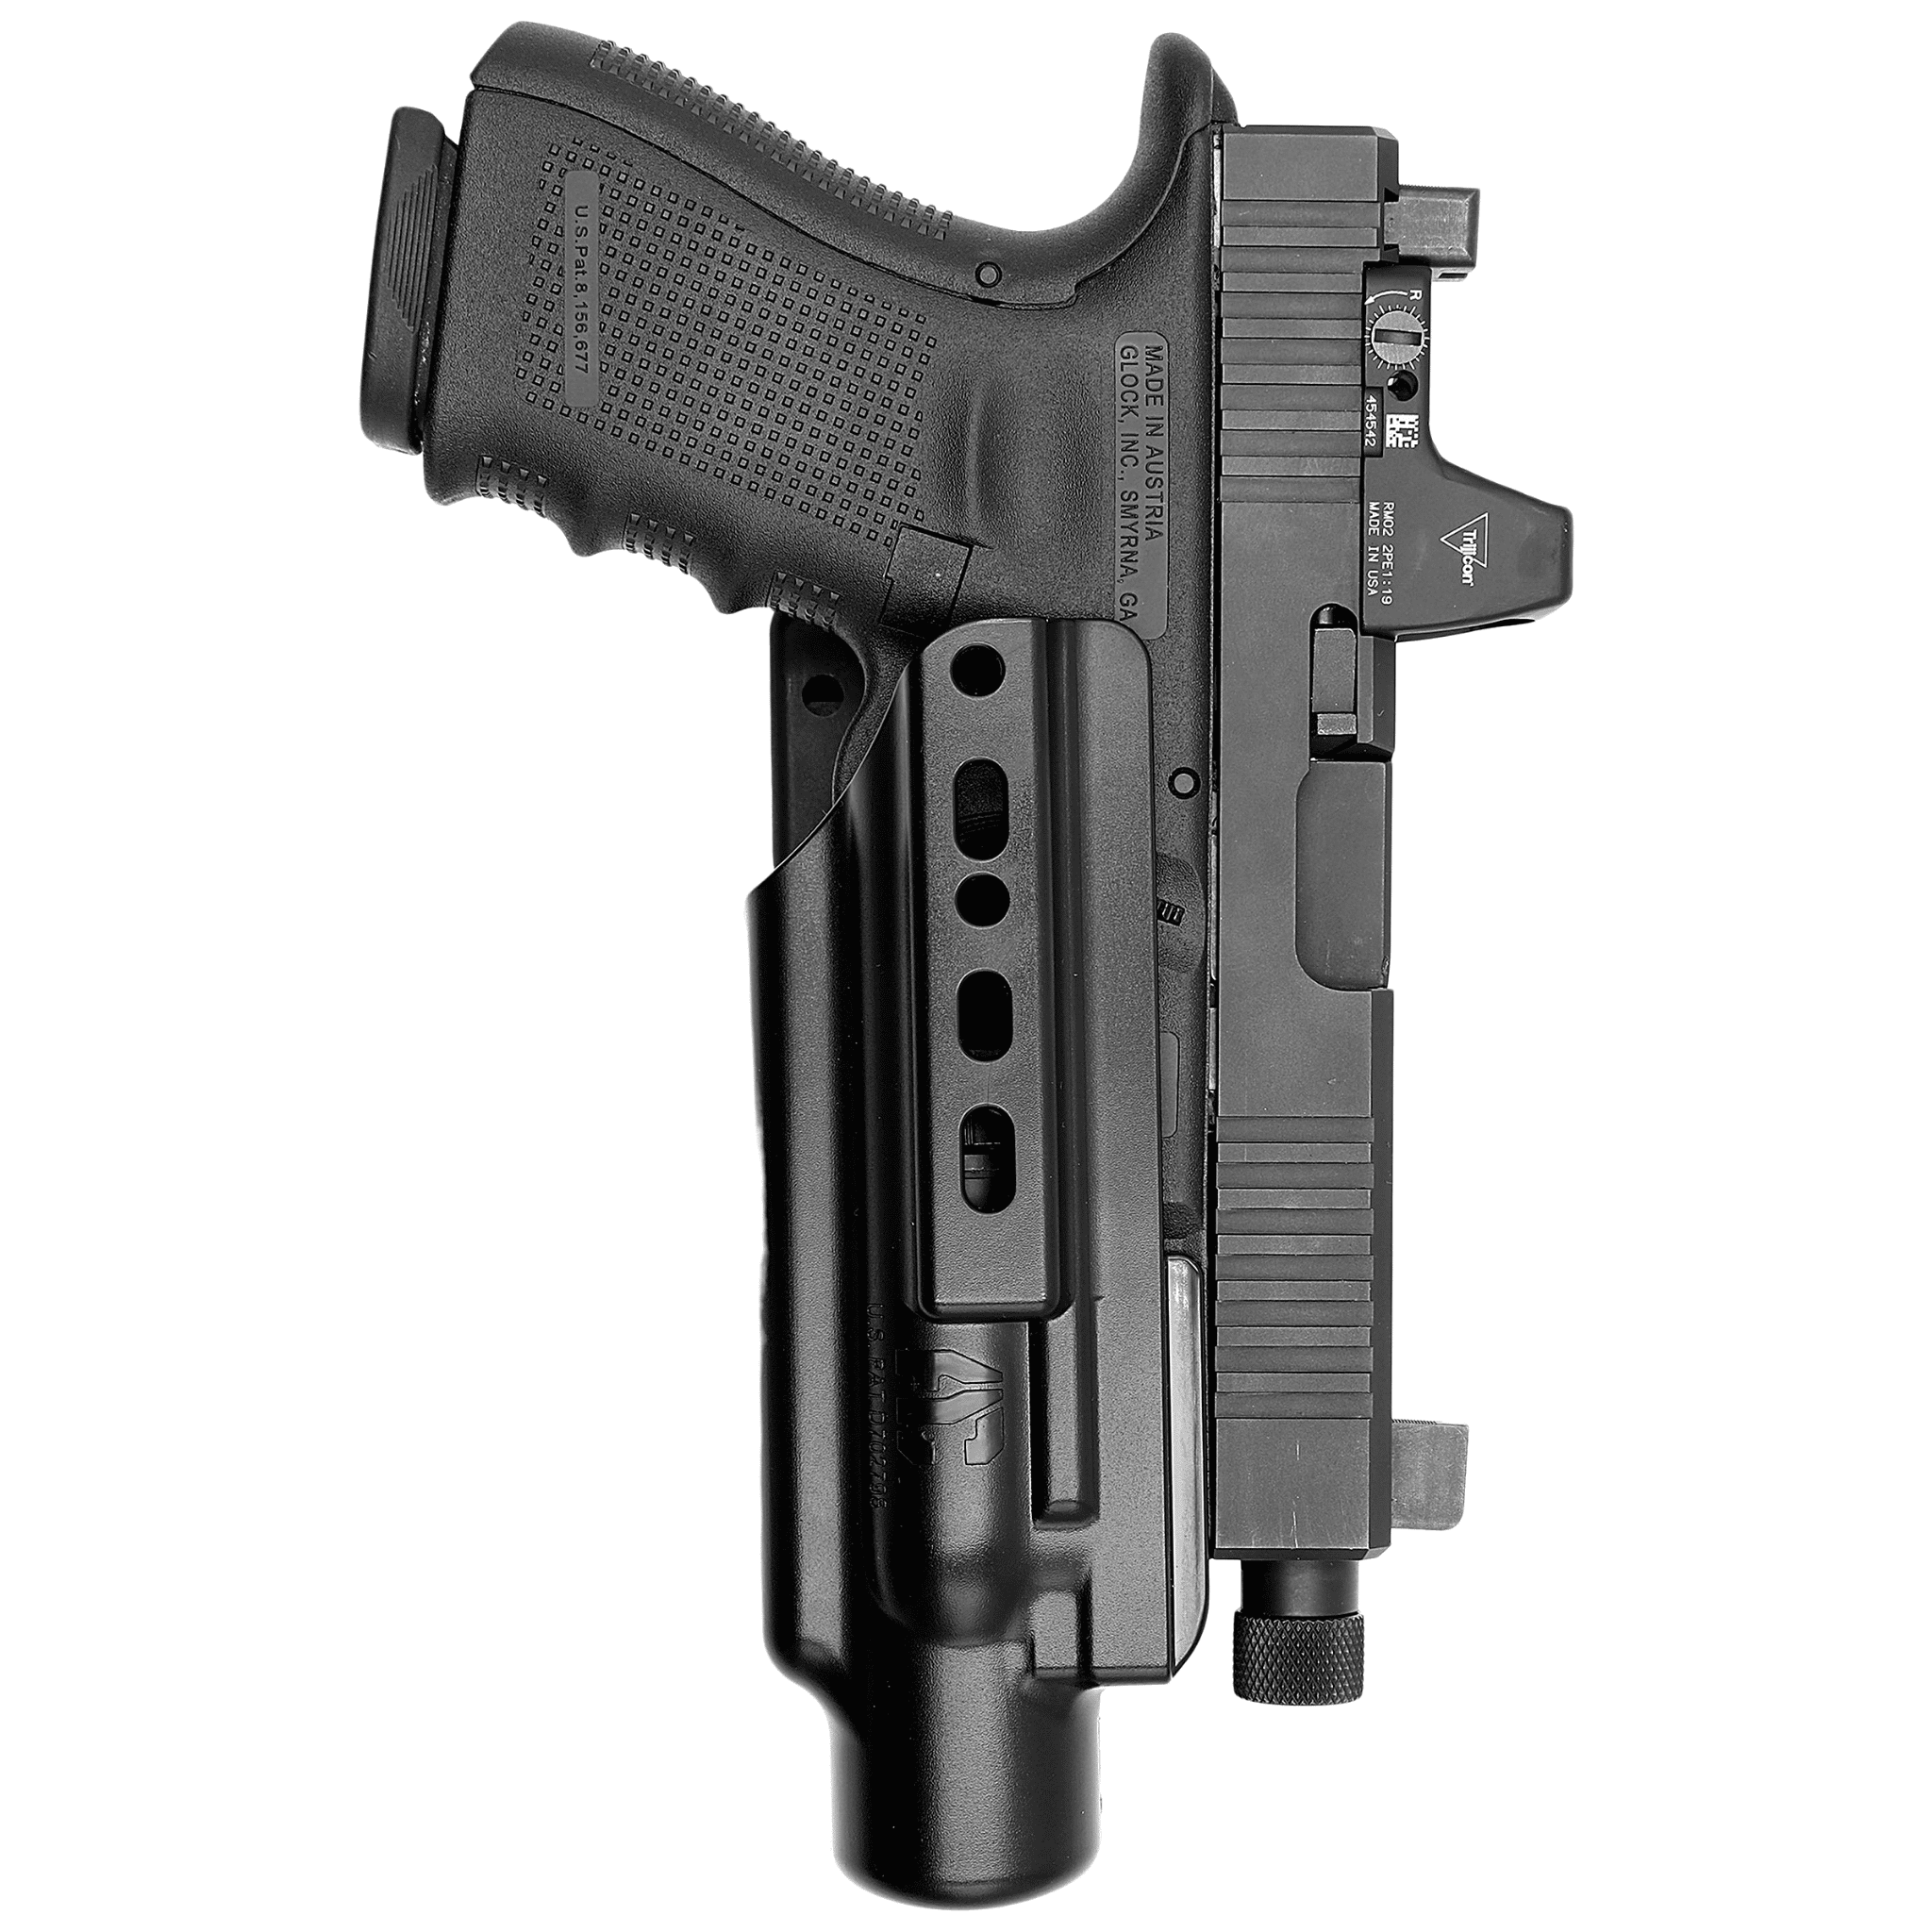 4. The Impact of Suppressor Compatibility on Holster Selection